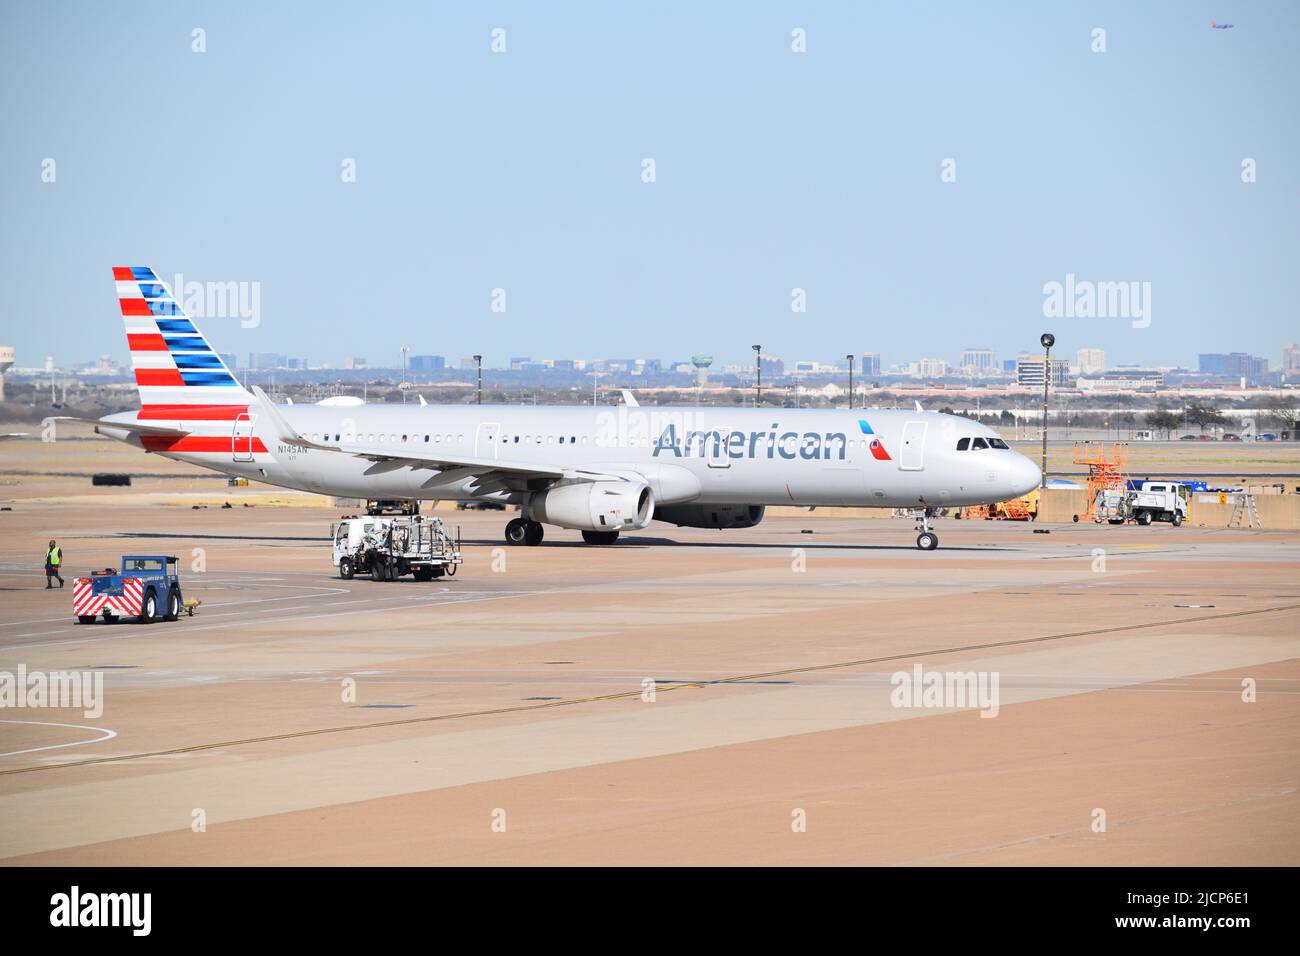 An American Airlines plane after being serviced by ramp service agents outside of a terminal at DFW Airport (Dallas-Fort Worth Airport) Stock Photo